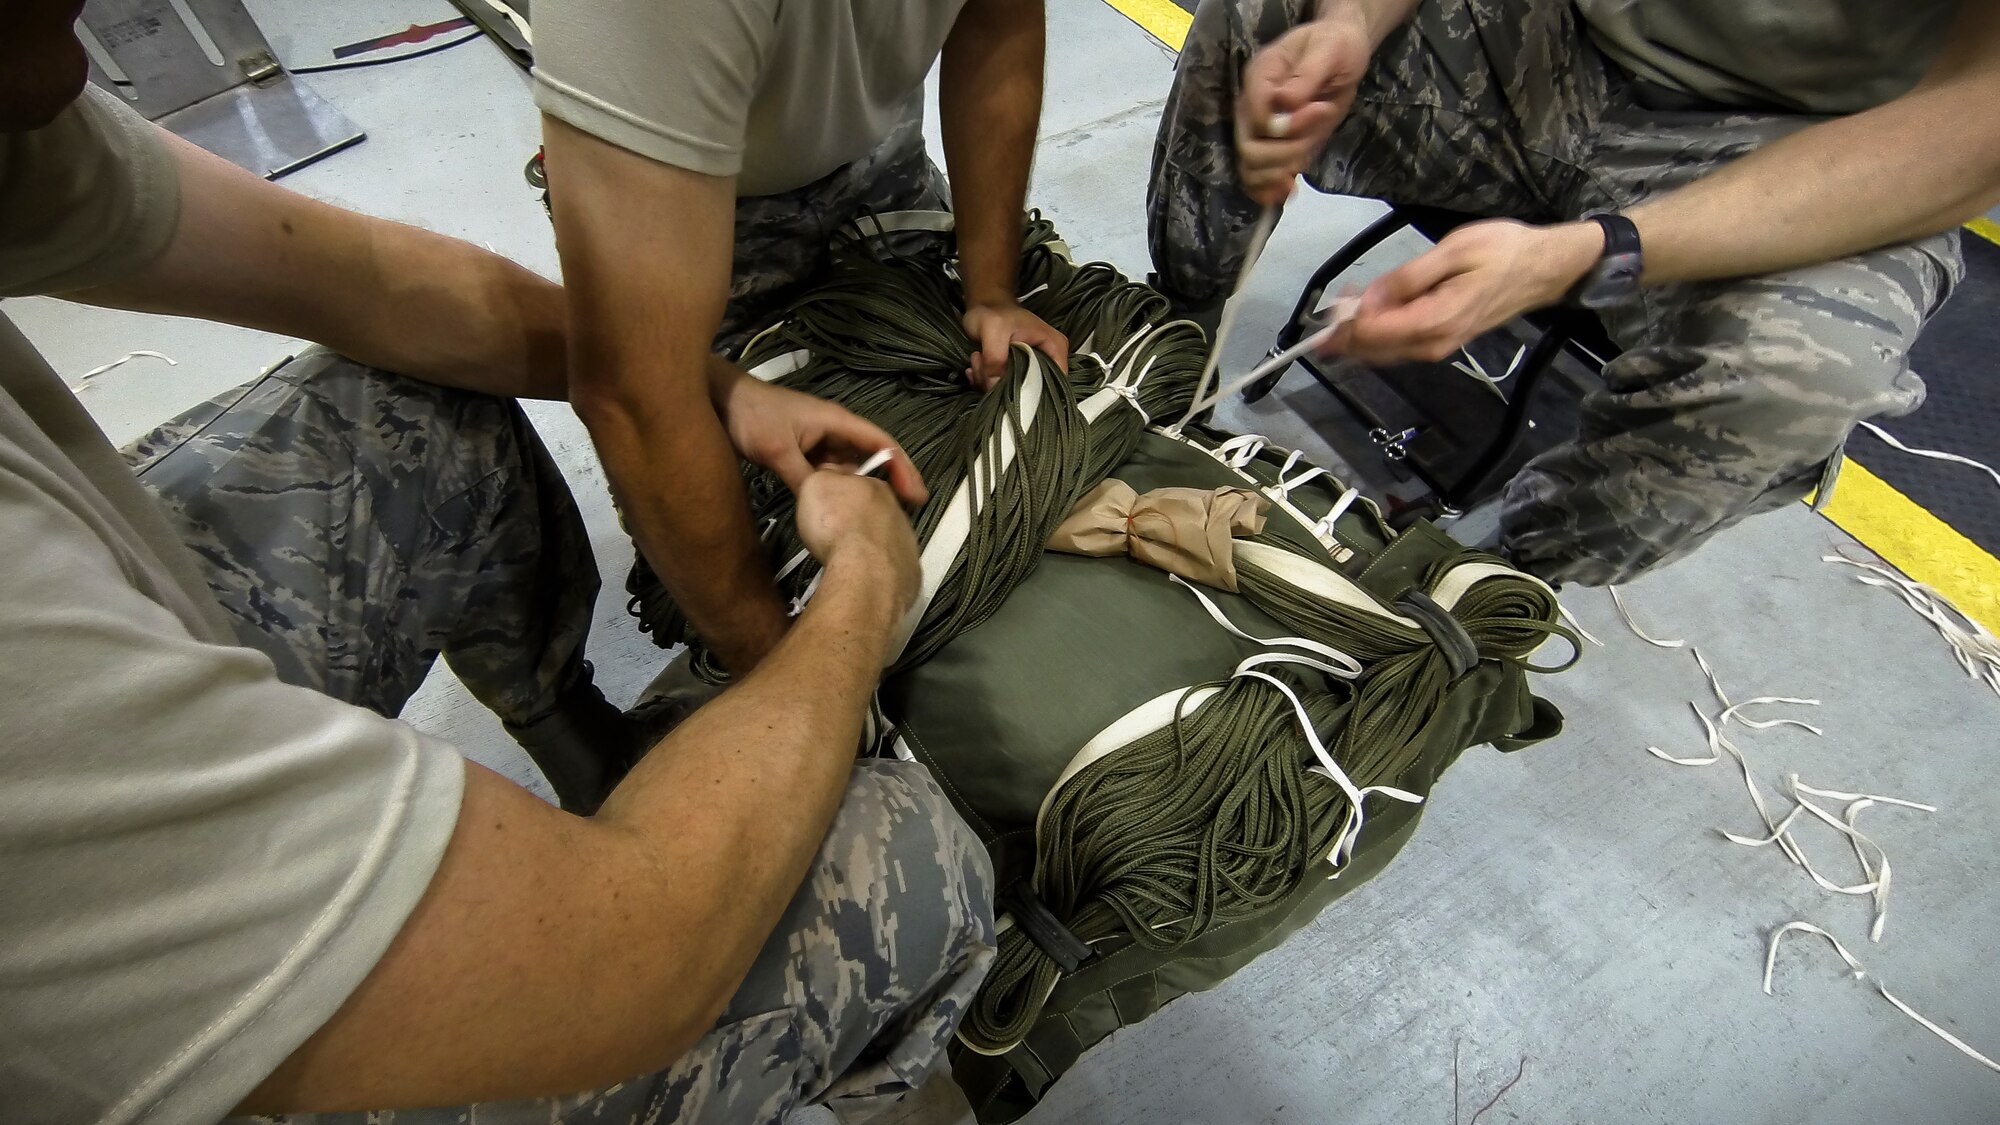 Technical Sgt. Jesse Sorrell (left), Technical Sgt. Jeremy Martinson and Technical Sgt. Joshua Ellis ties up a G-12E Type V platform parachute after recovering it from the dropzone on June 6, 2015. The Airman from the 182d Airlift Wing, Small Air Terminal, Peoria, Ill. check and repack the parachute after it was used in a recent C-130 air drop training mission with heavy equipment at the dropzone. (U.S. Air National Guard photo by Master Sgt. Scott Thompson/Released)